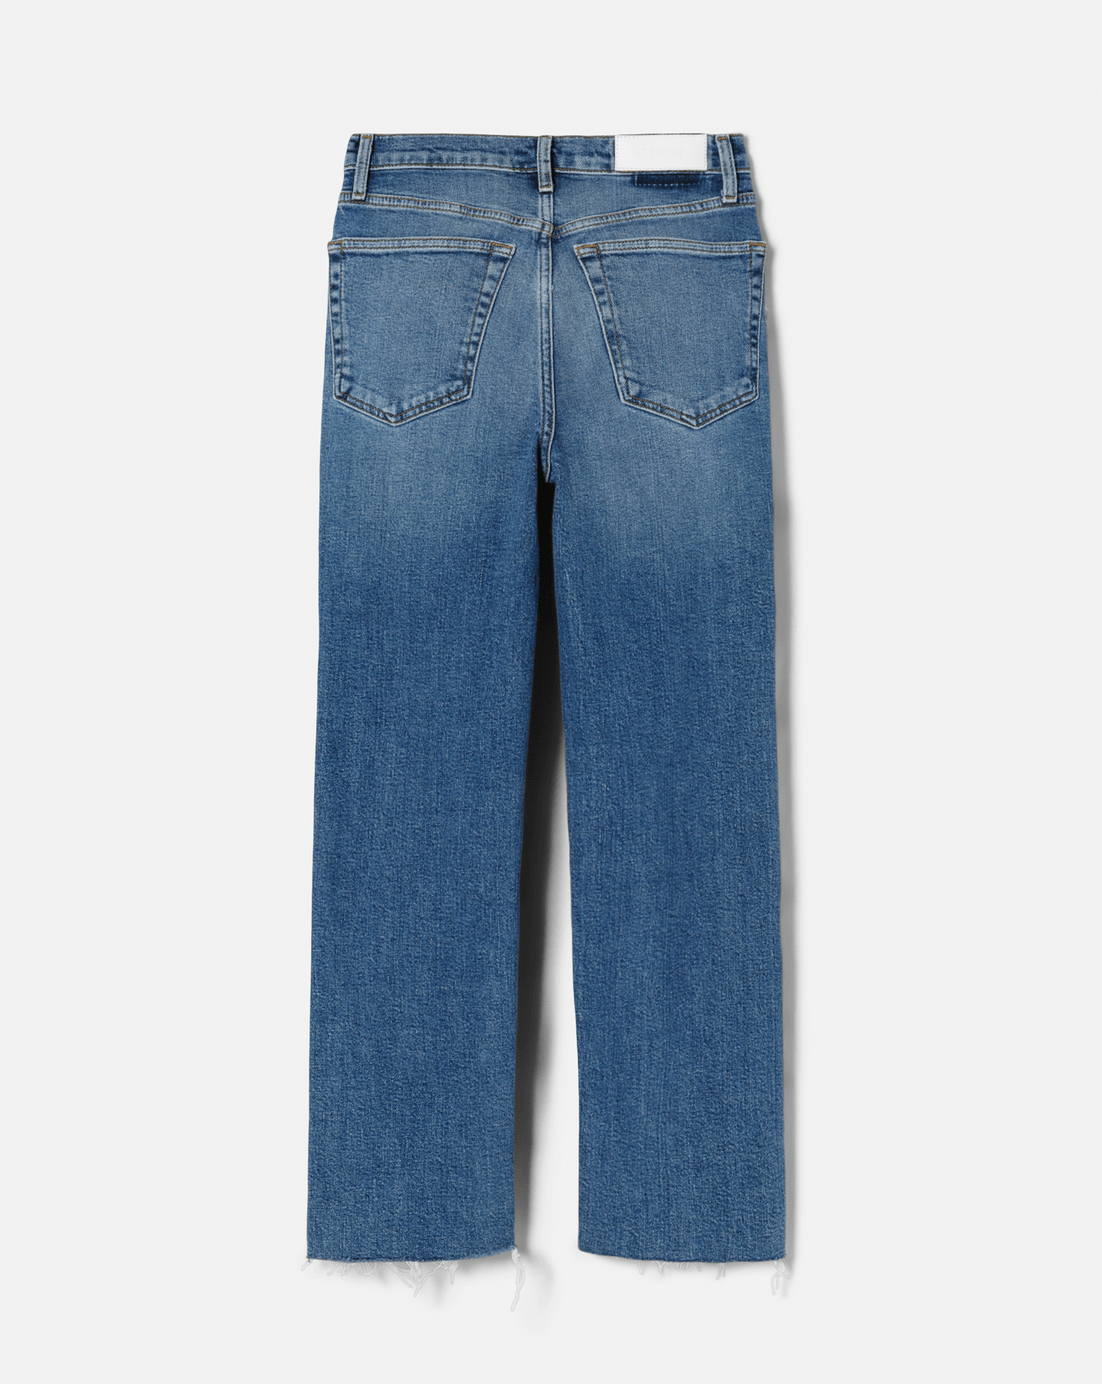 70's Stove Pipe Jeans - Frock Shop